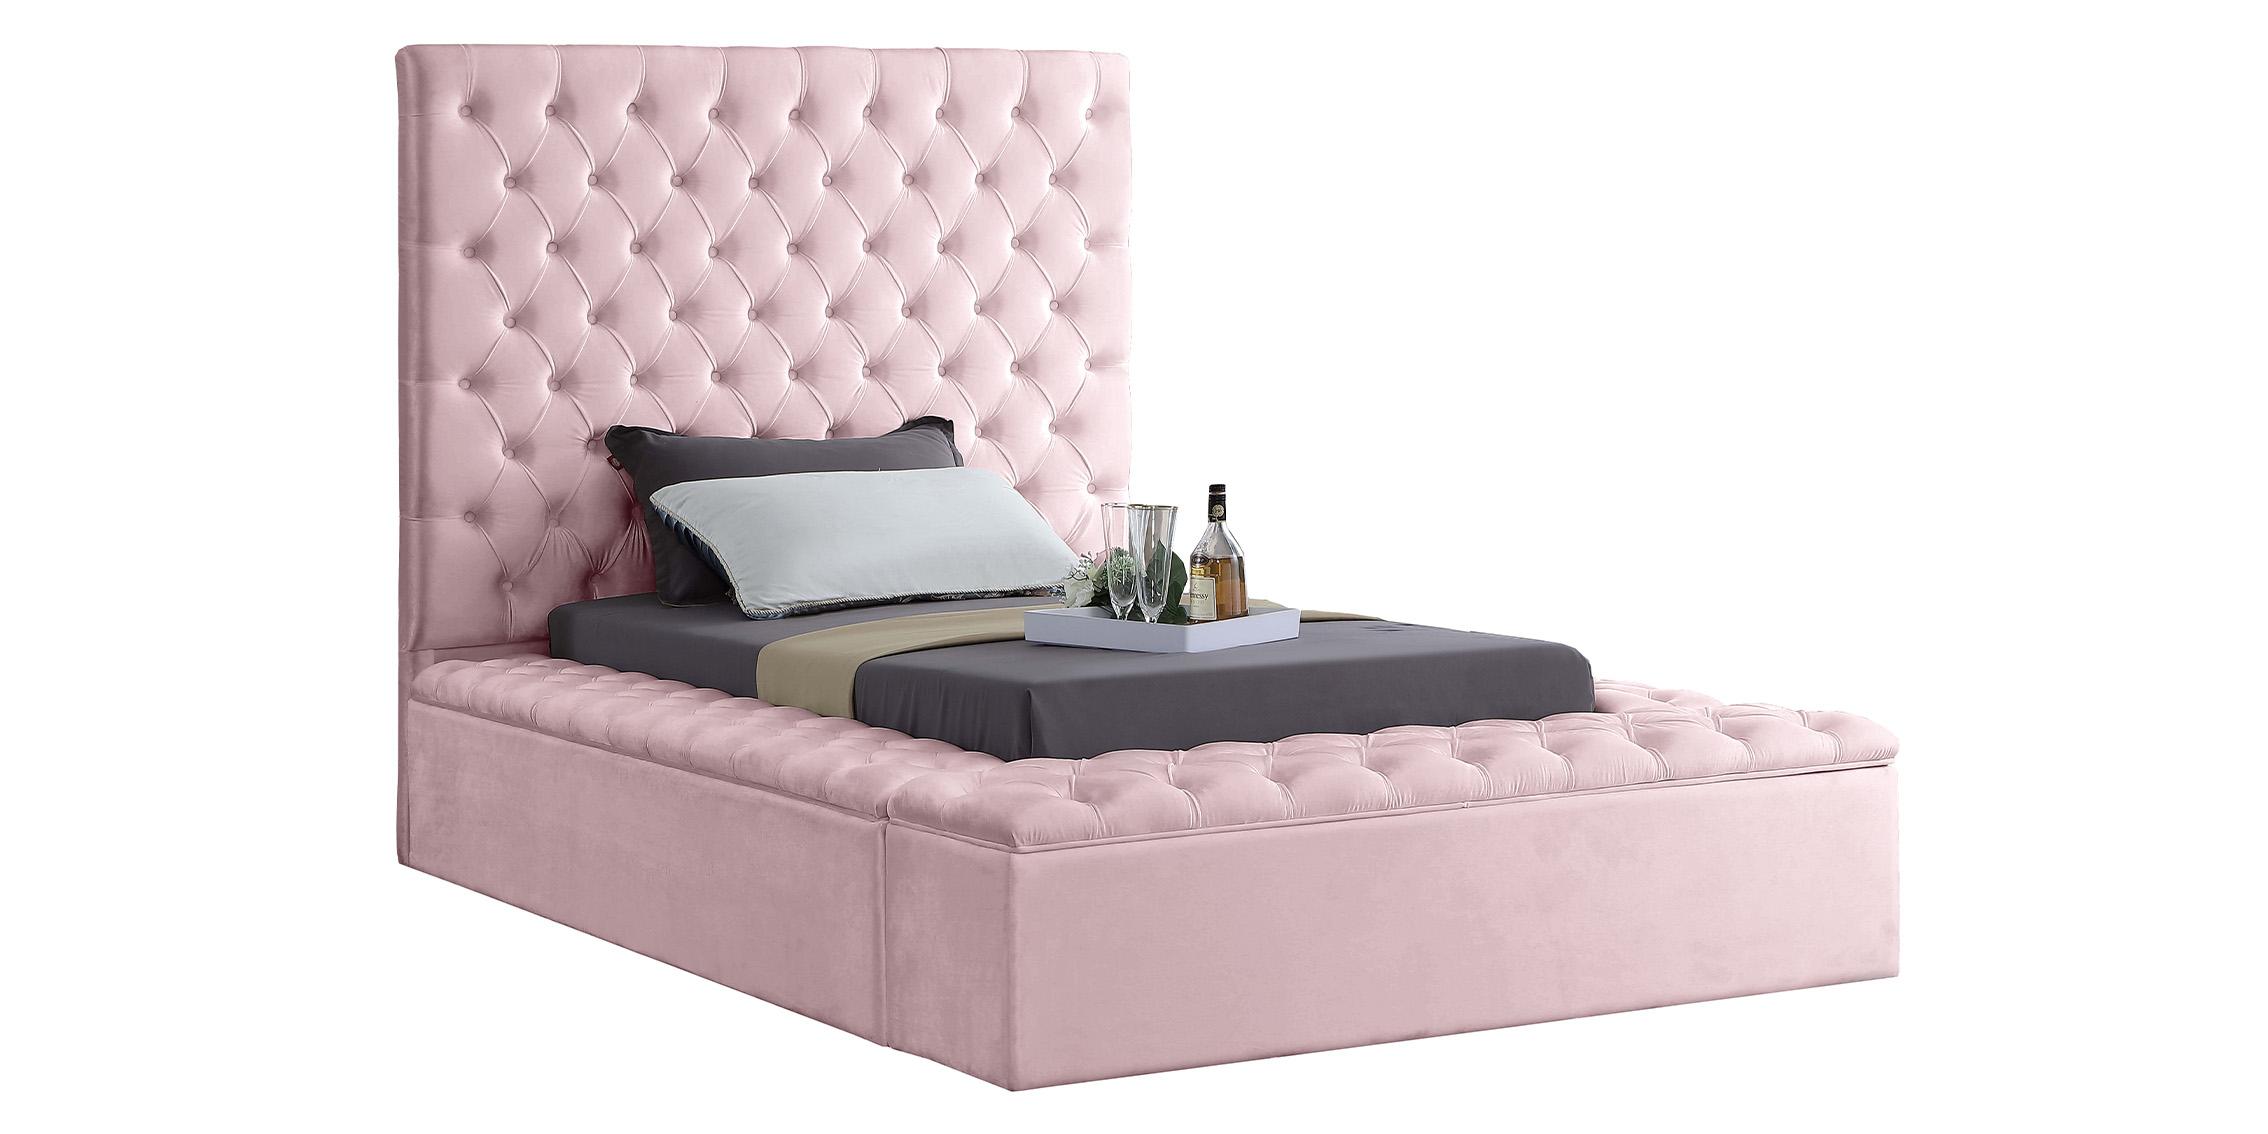 

    
Pink Velvet Tufted Storage Twin Bed BLISS Meridian Contemporary Modern
